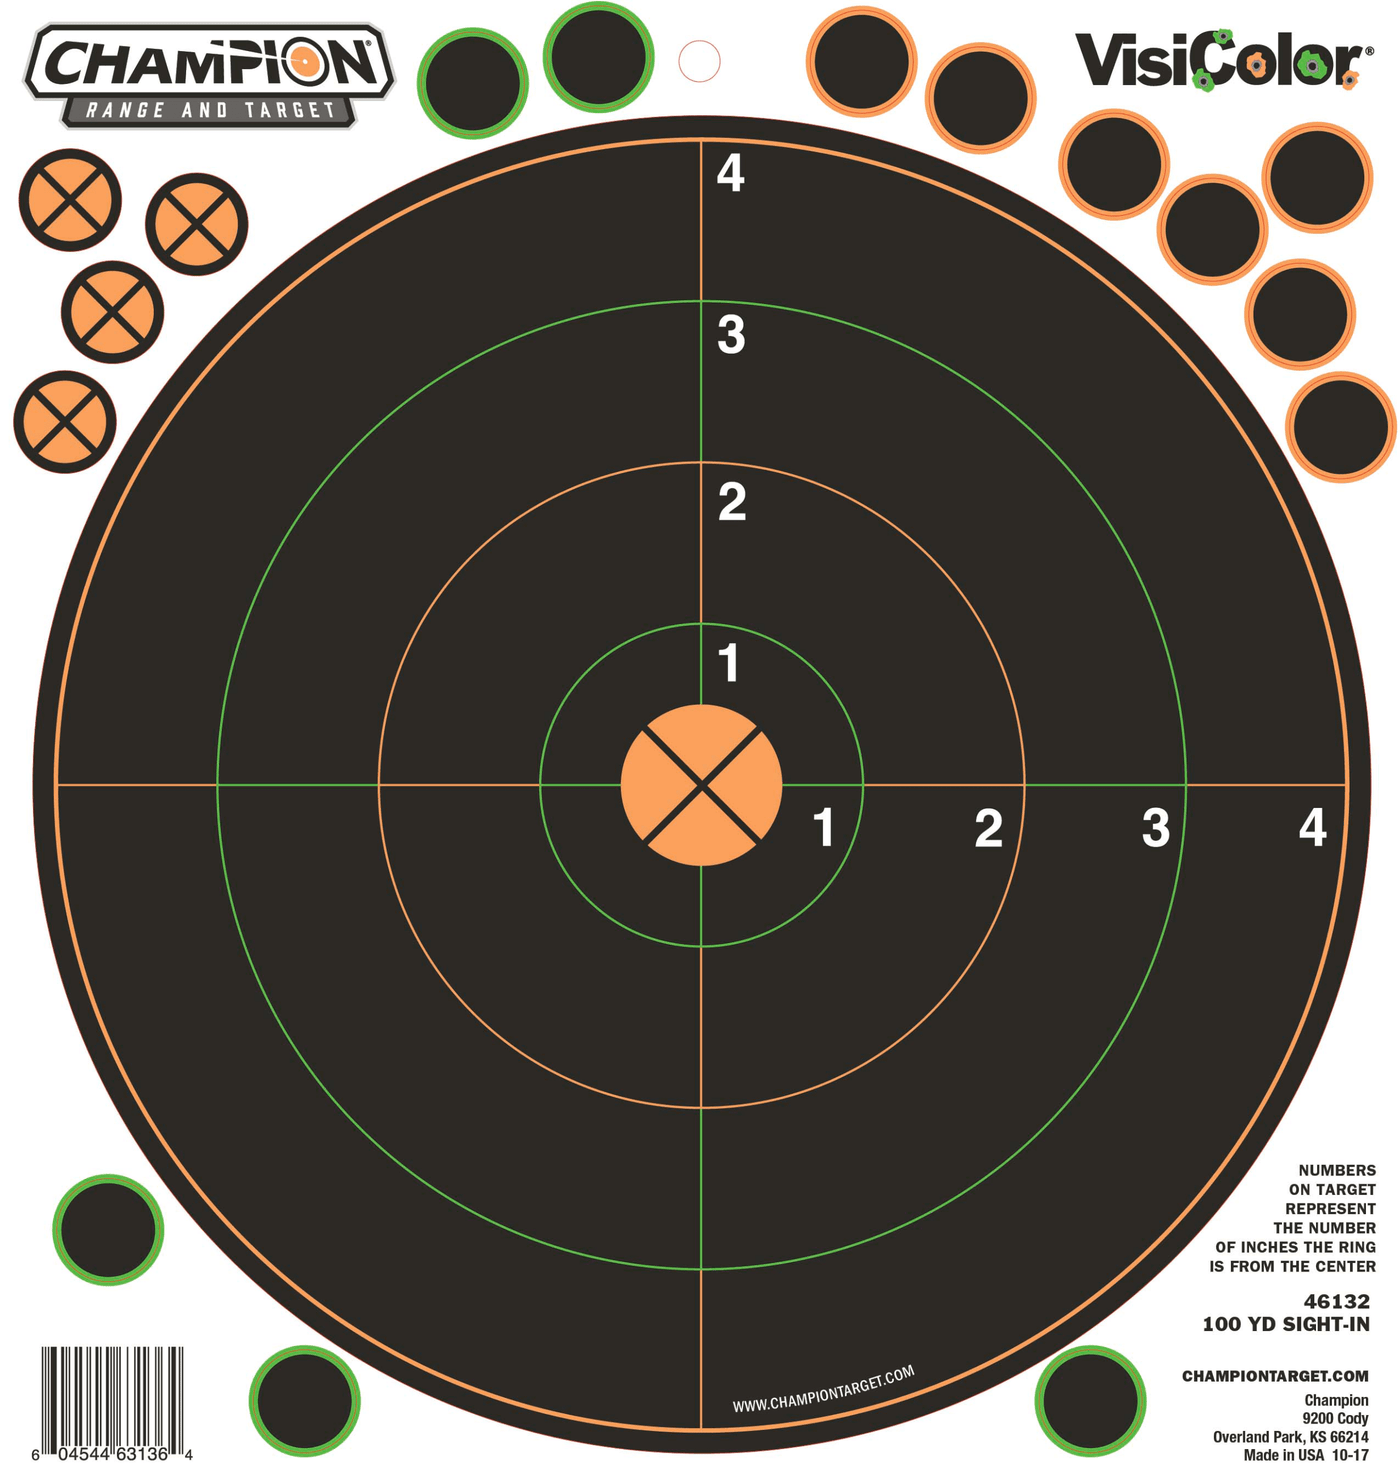 Champion Targets Champion Targets Visicolor, Champ 46132 100yd Sight In Target 5pk W/30 Pasters Shooting